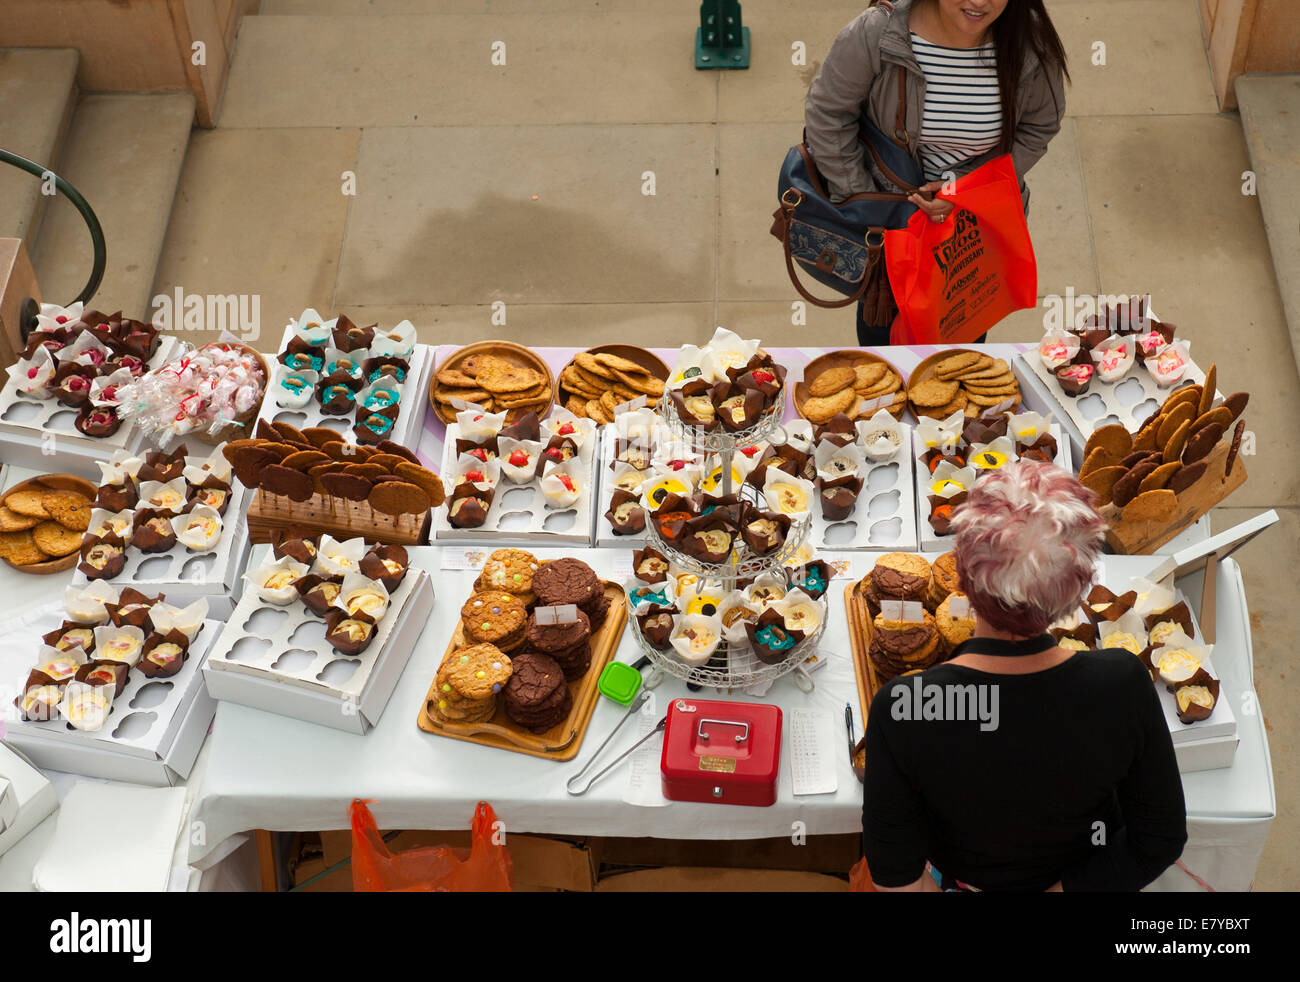 Tobacco Dock, Shadwell, London UK. 26th September 2014. 10th anniversary International London Tattoo Convention runs from 26th-28th September. Cake stand at the convention. Credit:  Malcolm Park editorial/Alamy Live News. Stock Photo